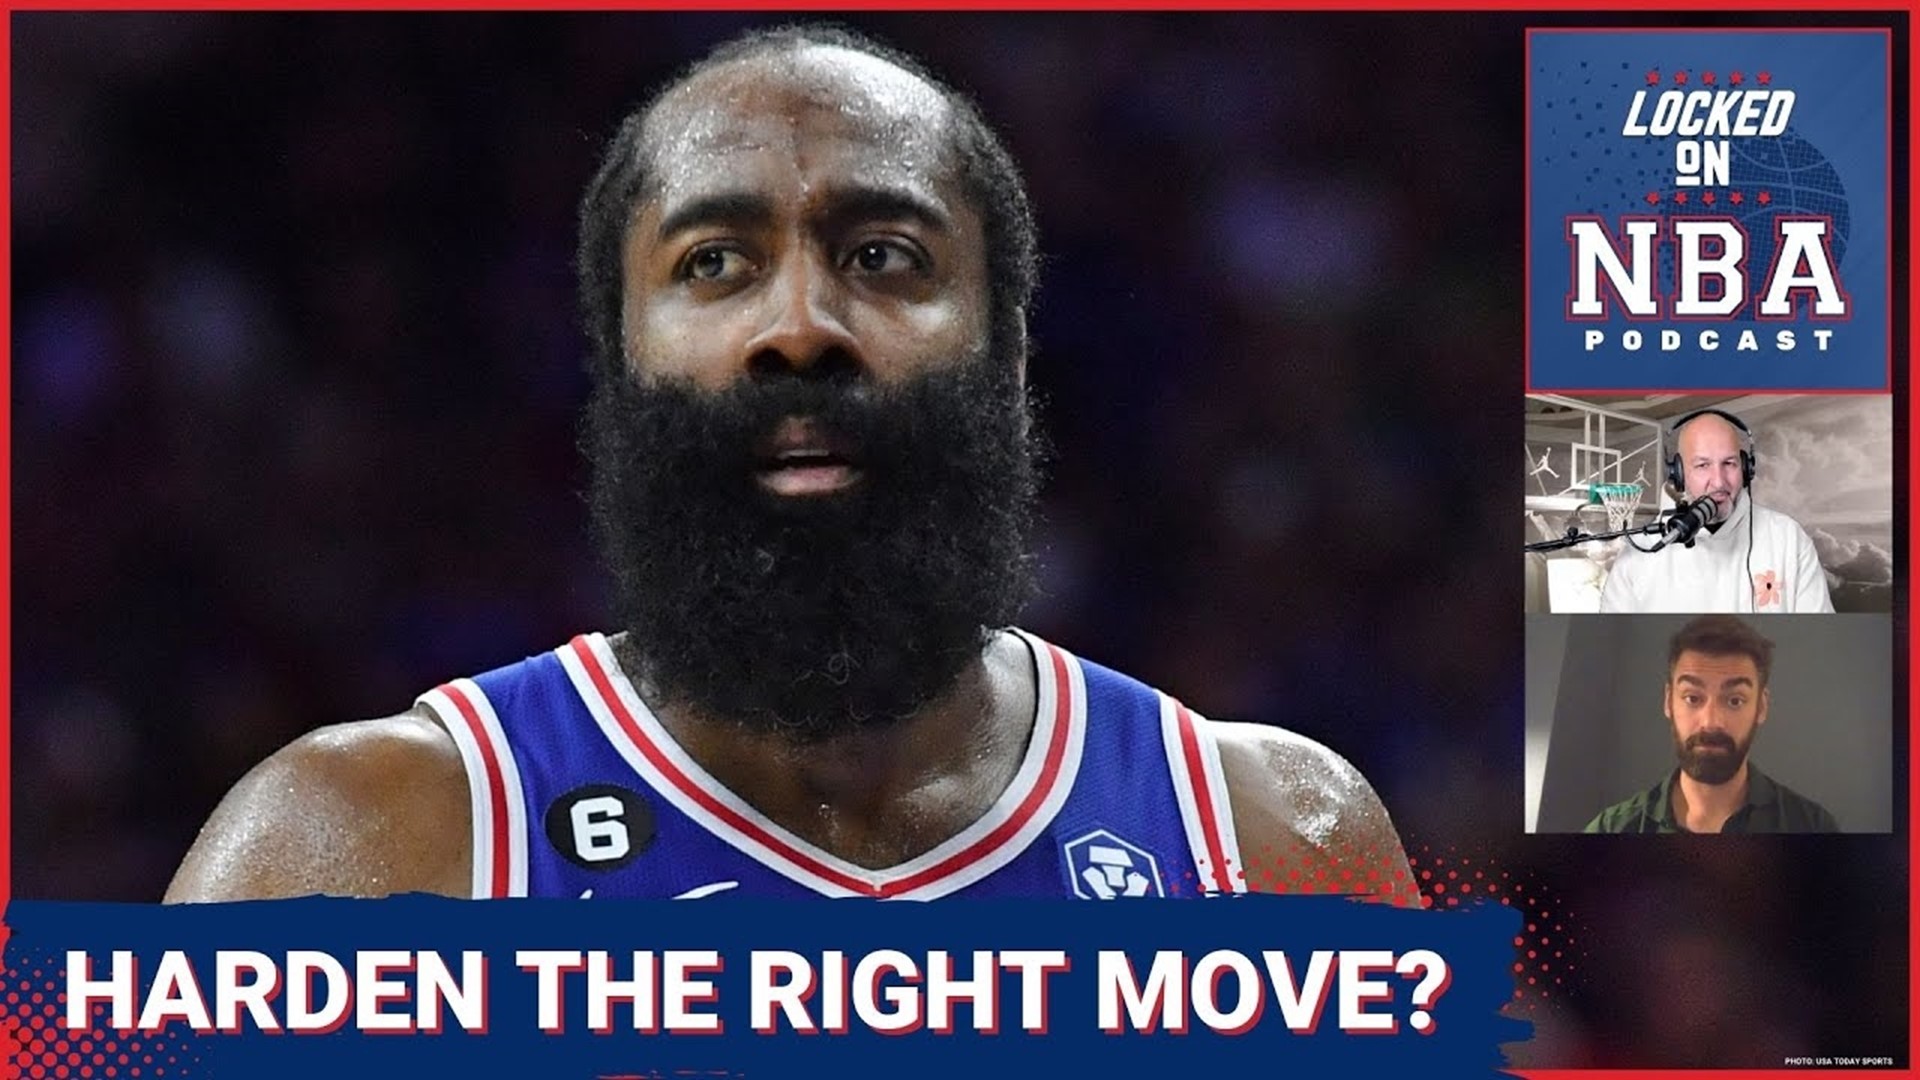 The Los Angeles are going all in to pair James Harden with Kawhi Leonard, Paul George, and Russell Westbrook, but how much does it move the needle?